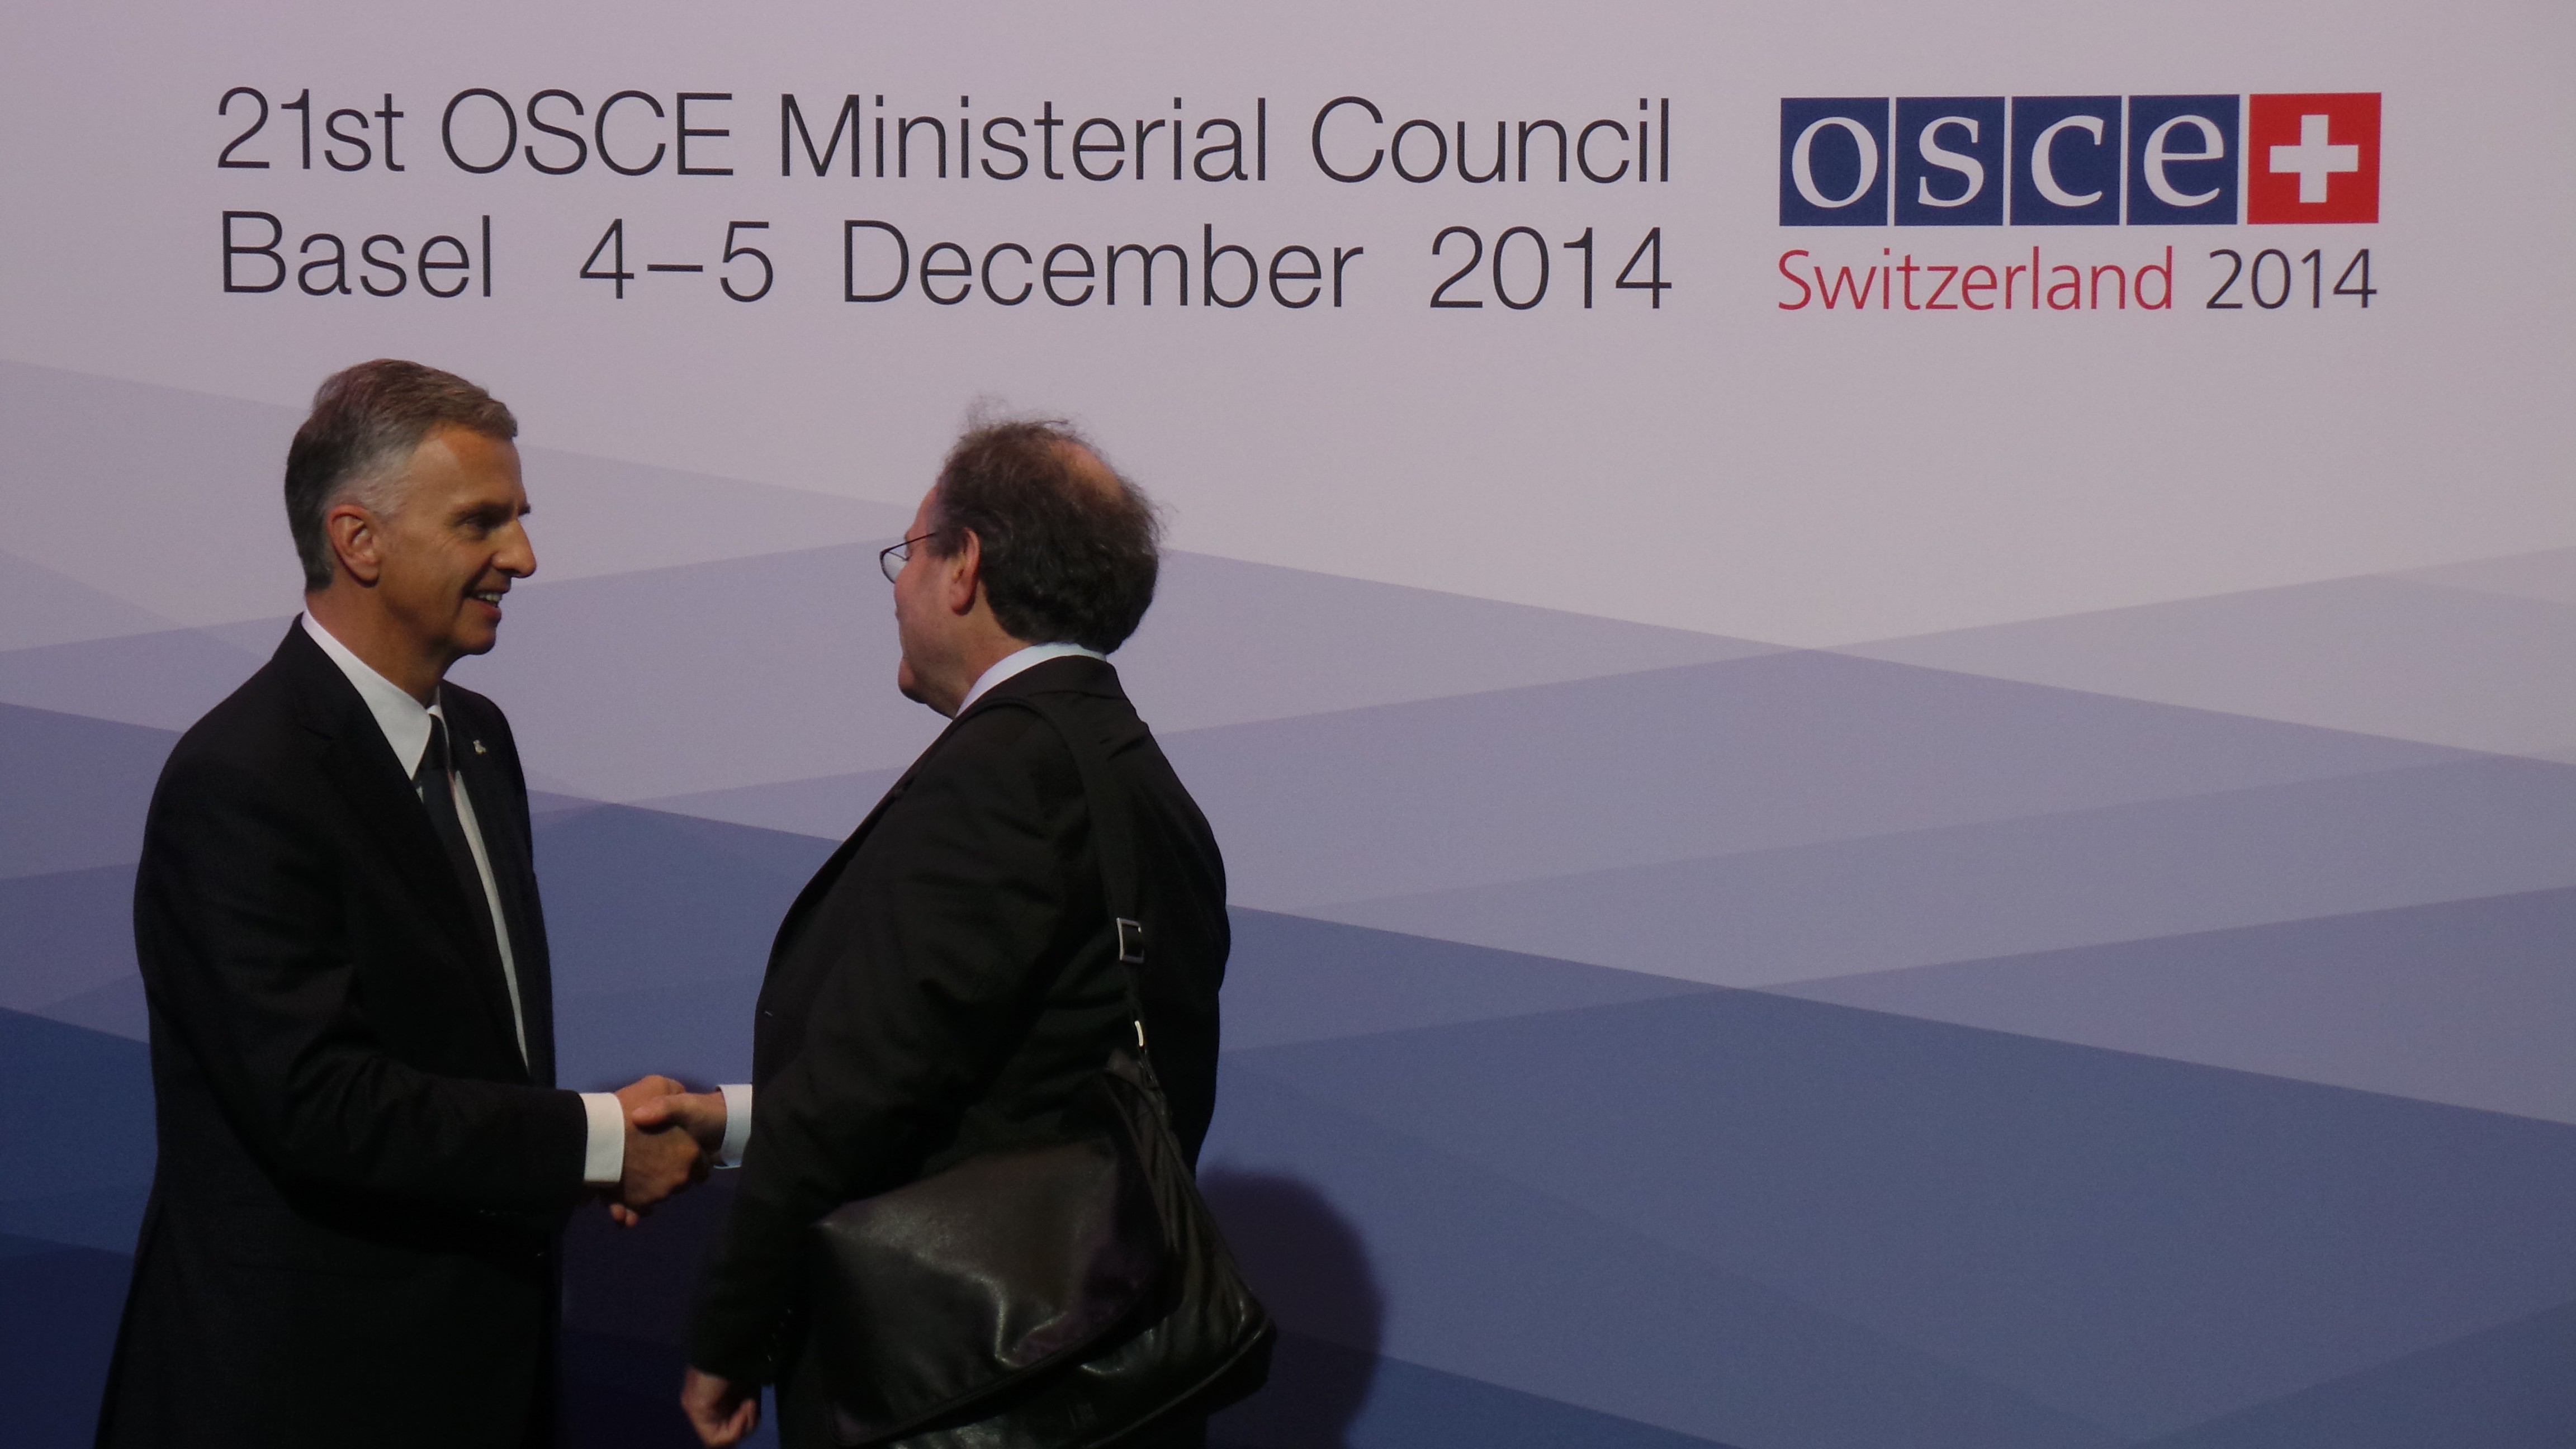 The President of the Swiss Confederation, Didier Burkhalter, greets Vincent Cochetel, Director of the Europe Bureau at the United Nations High commissioner For Refugees (UNHCR) at the OSCE Ministerial Council 2014 in Basel